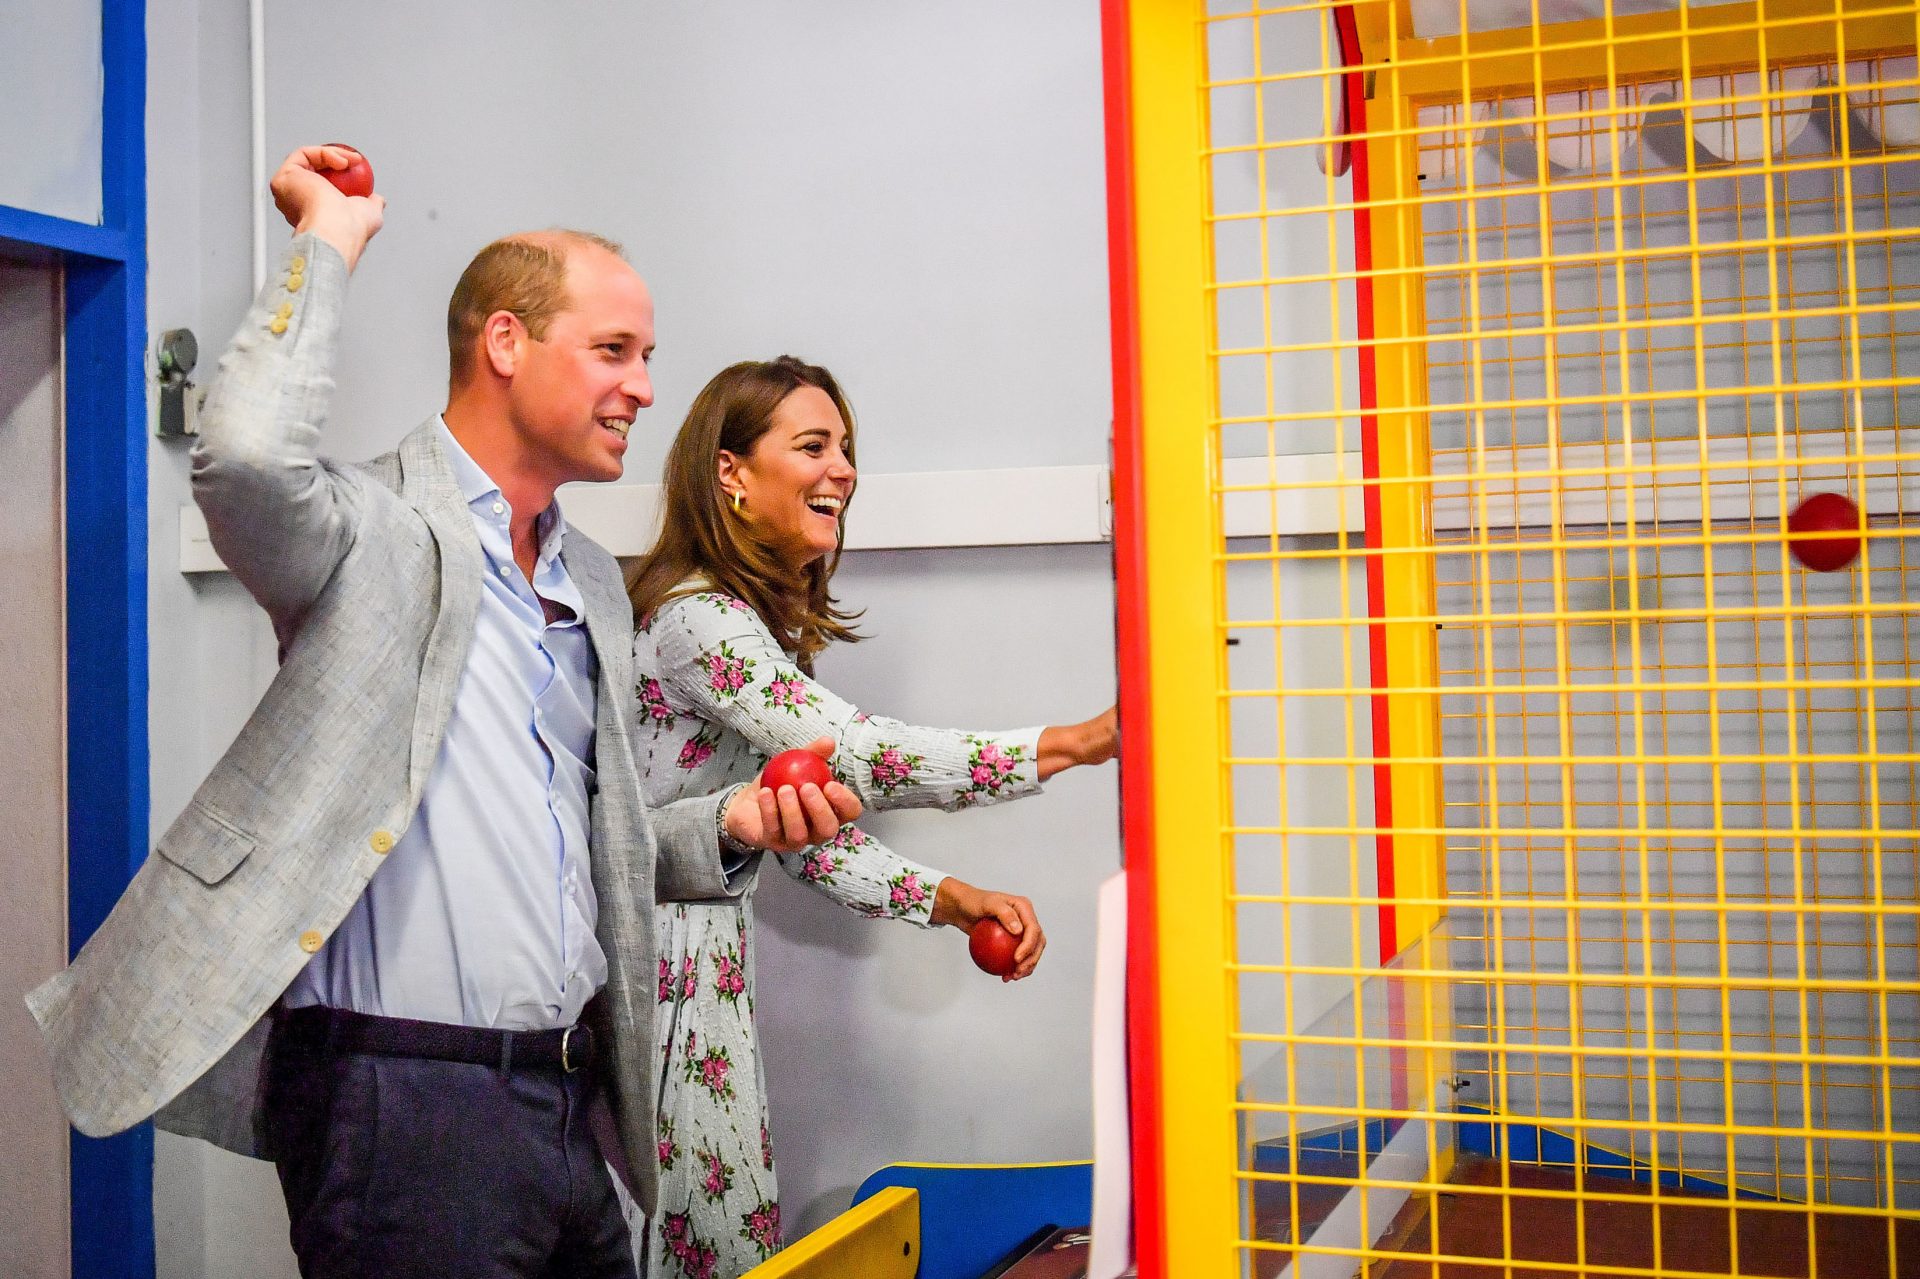 Kate Middleton and Prince William Went to an Arcade and Had a Ball—Sorry, I Couldn’t Face up to